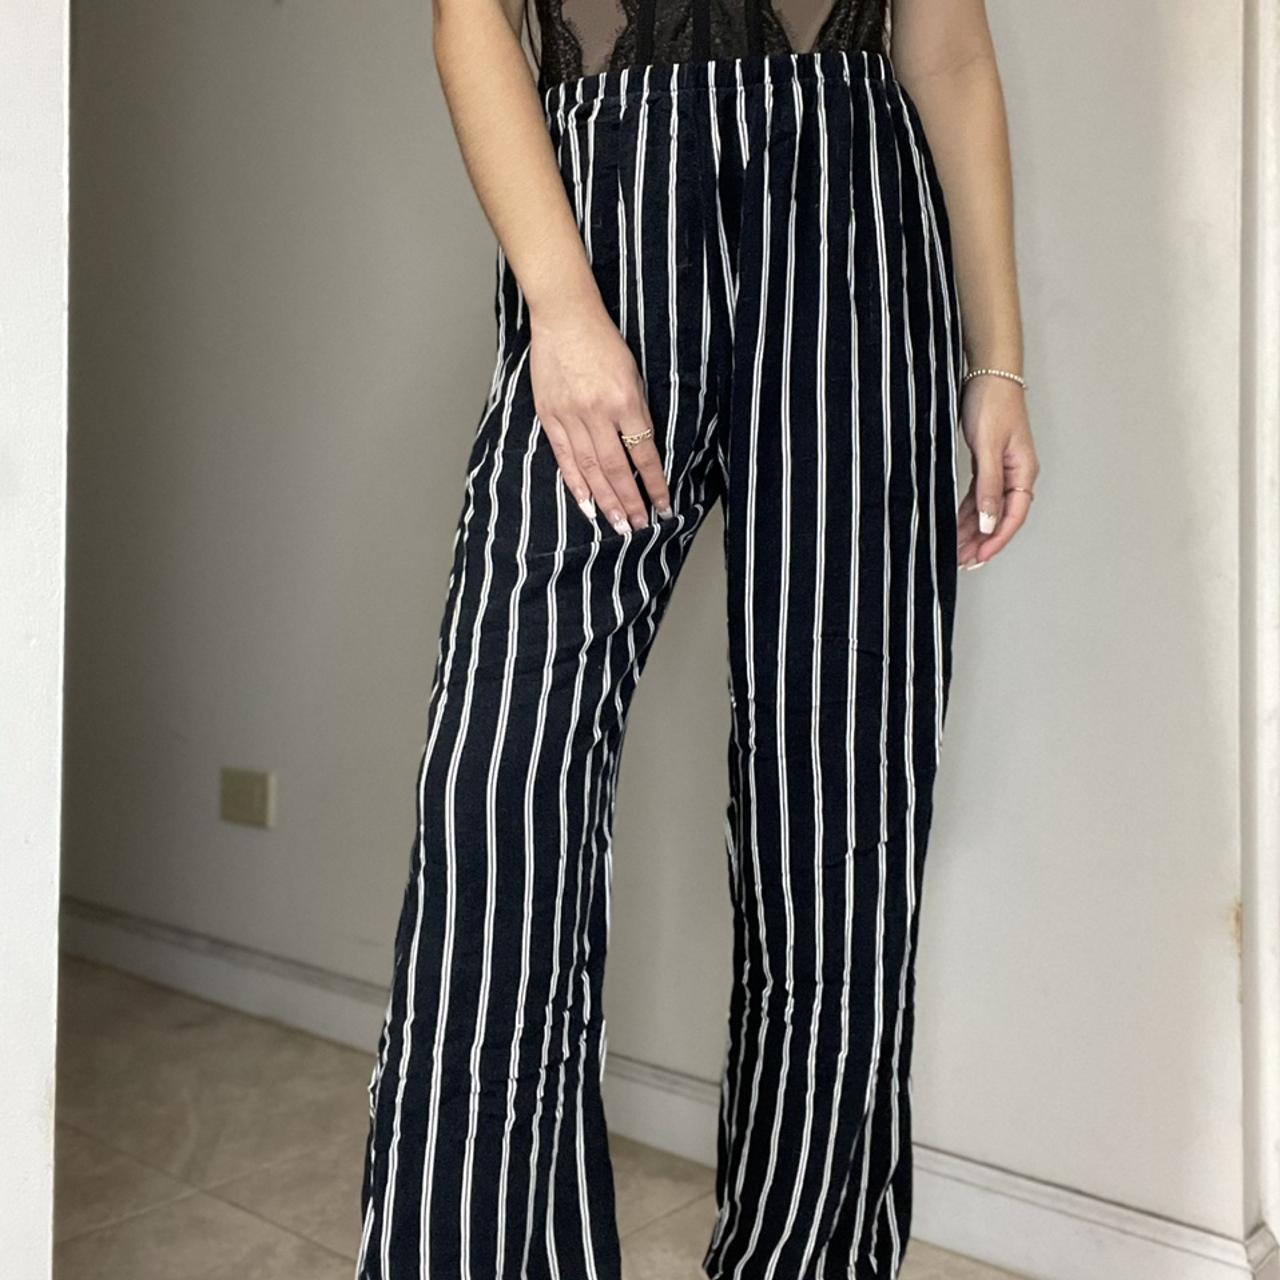 brandy melville tilden striped pants | Fashion, Clothes, Trendy outfits